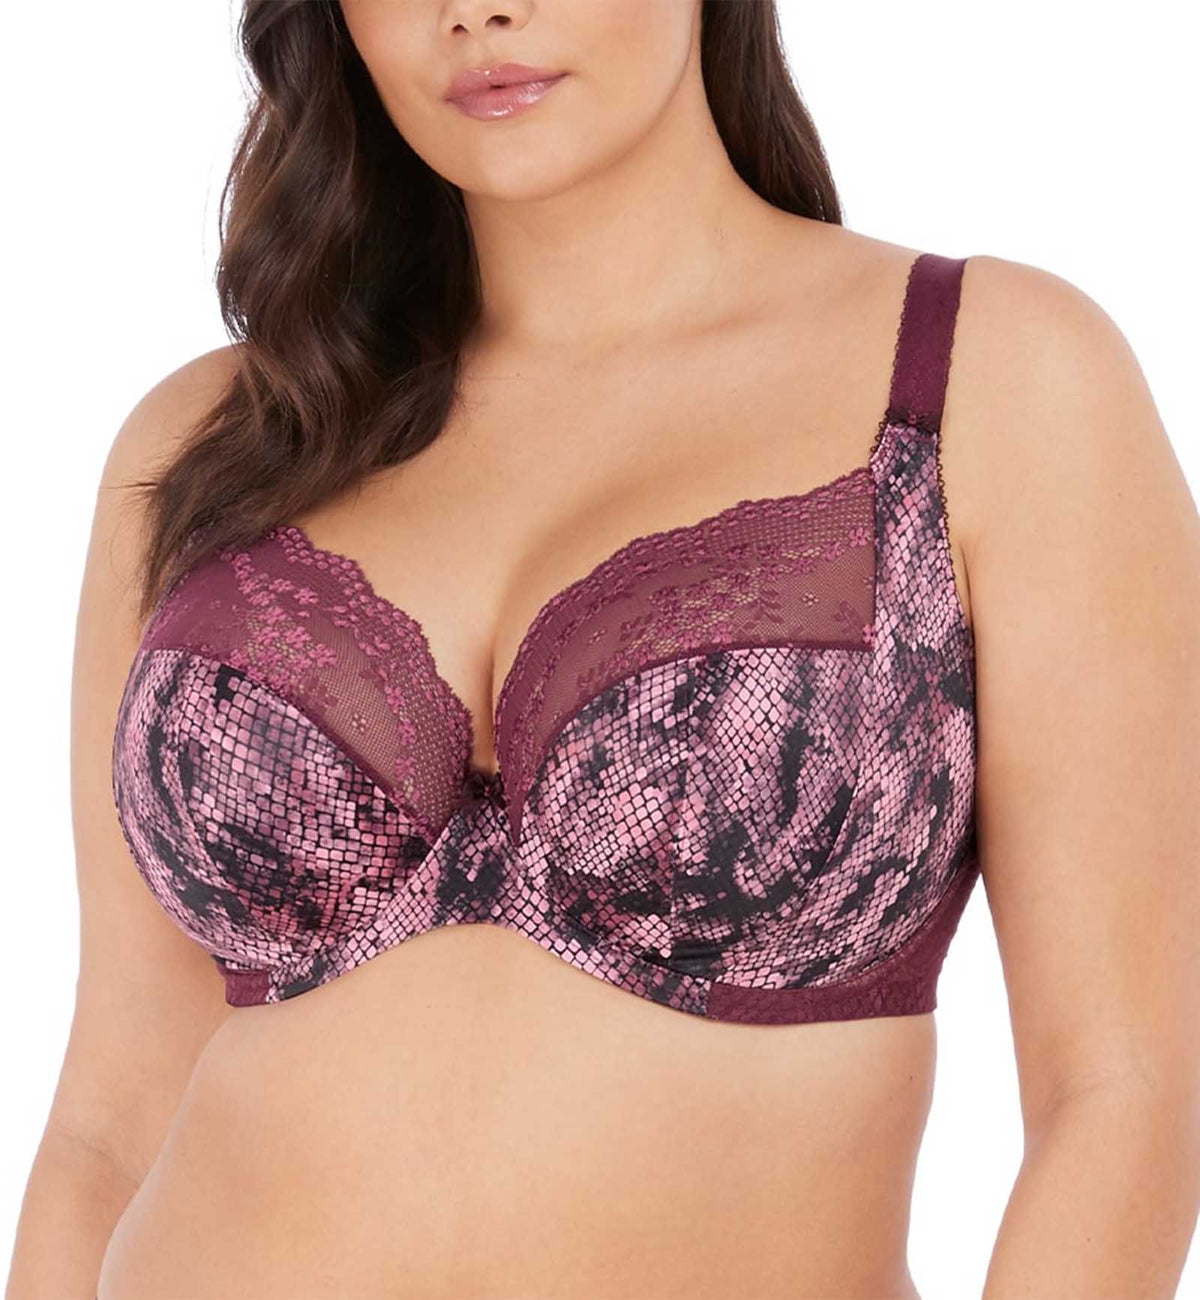 Elomi Lucie Banded Stretch Lace Plunge Underwire Bra (4490),32GG,Mambo - Mambo,32GG